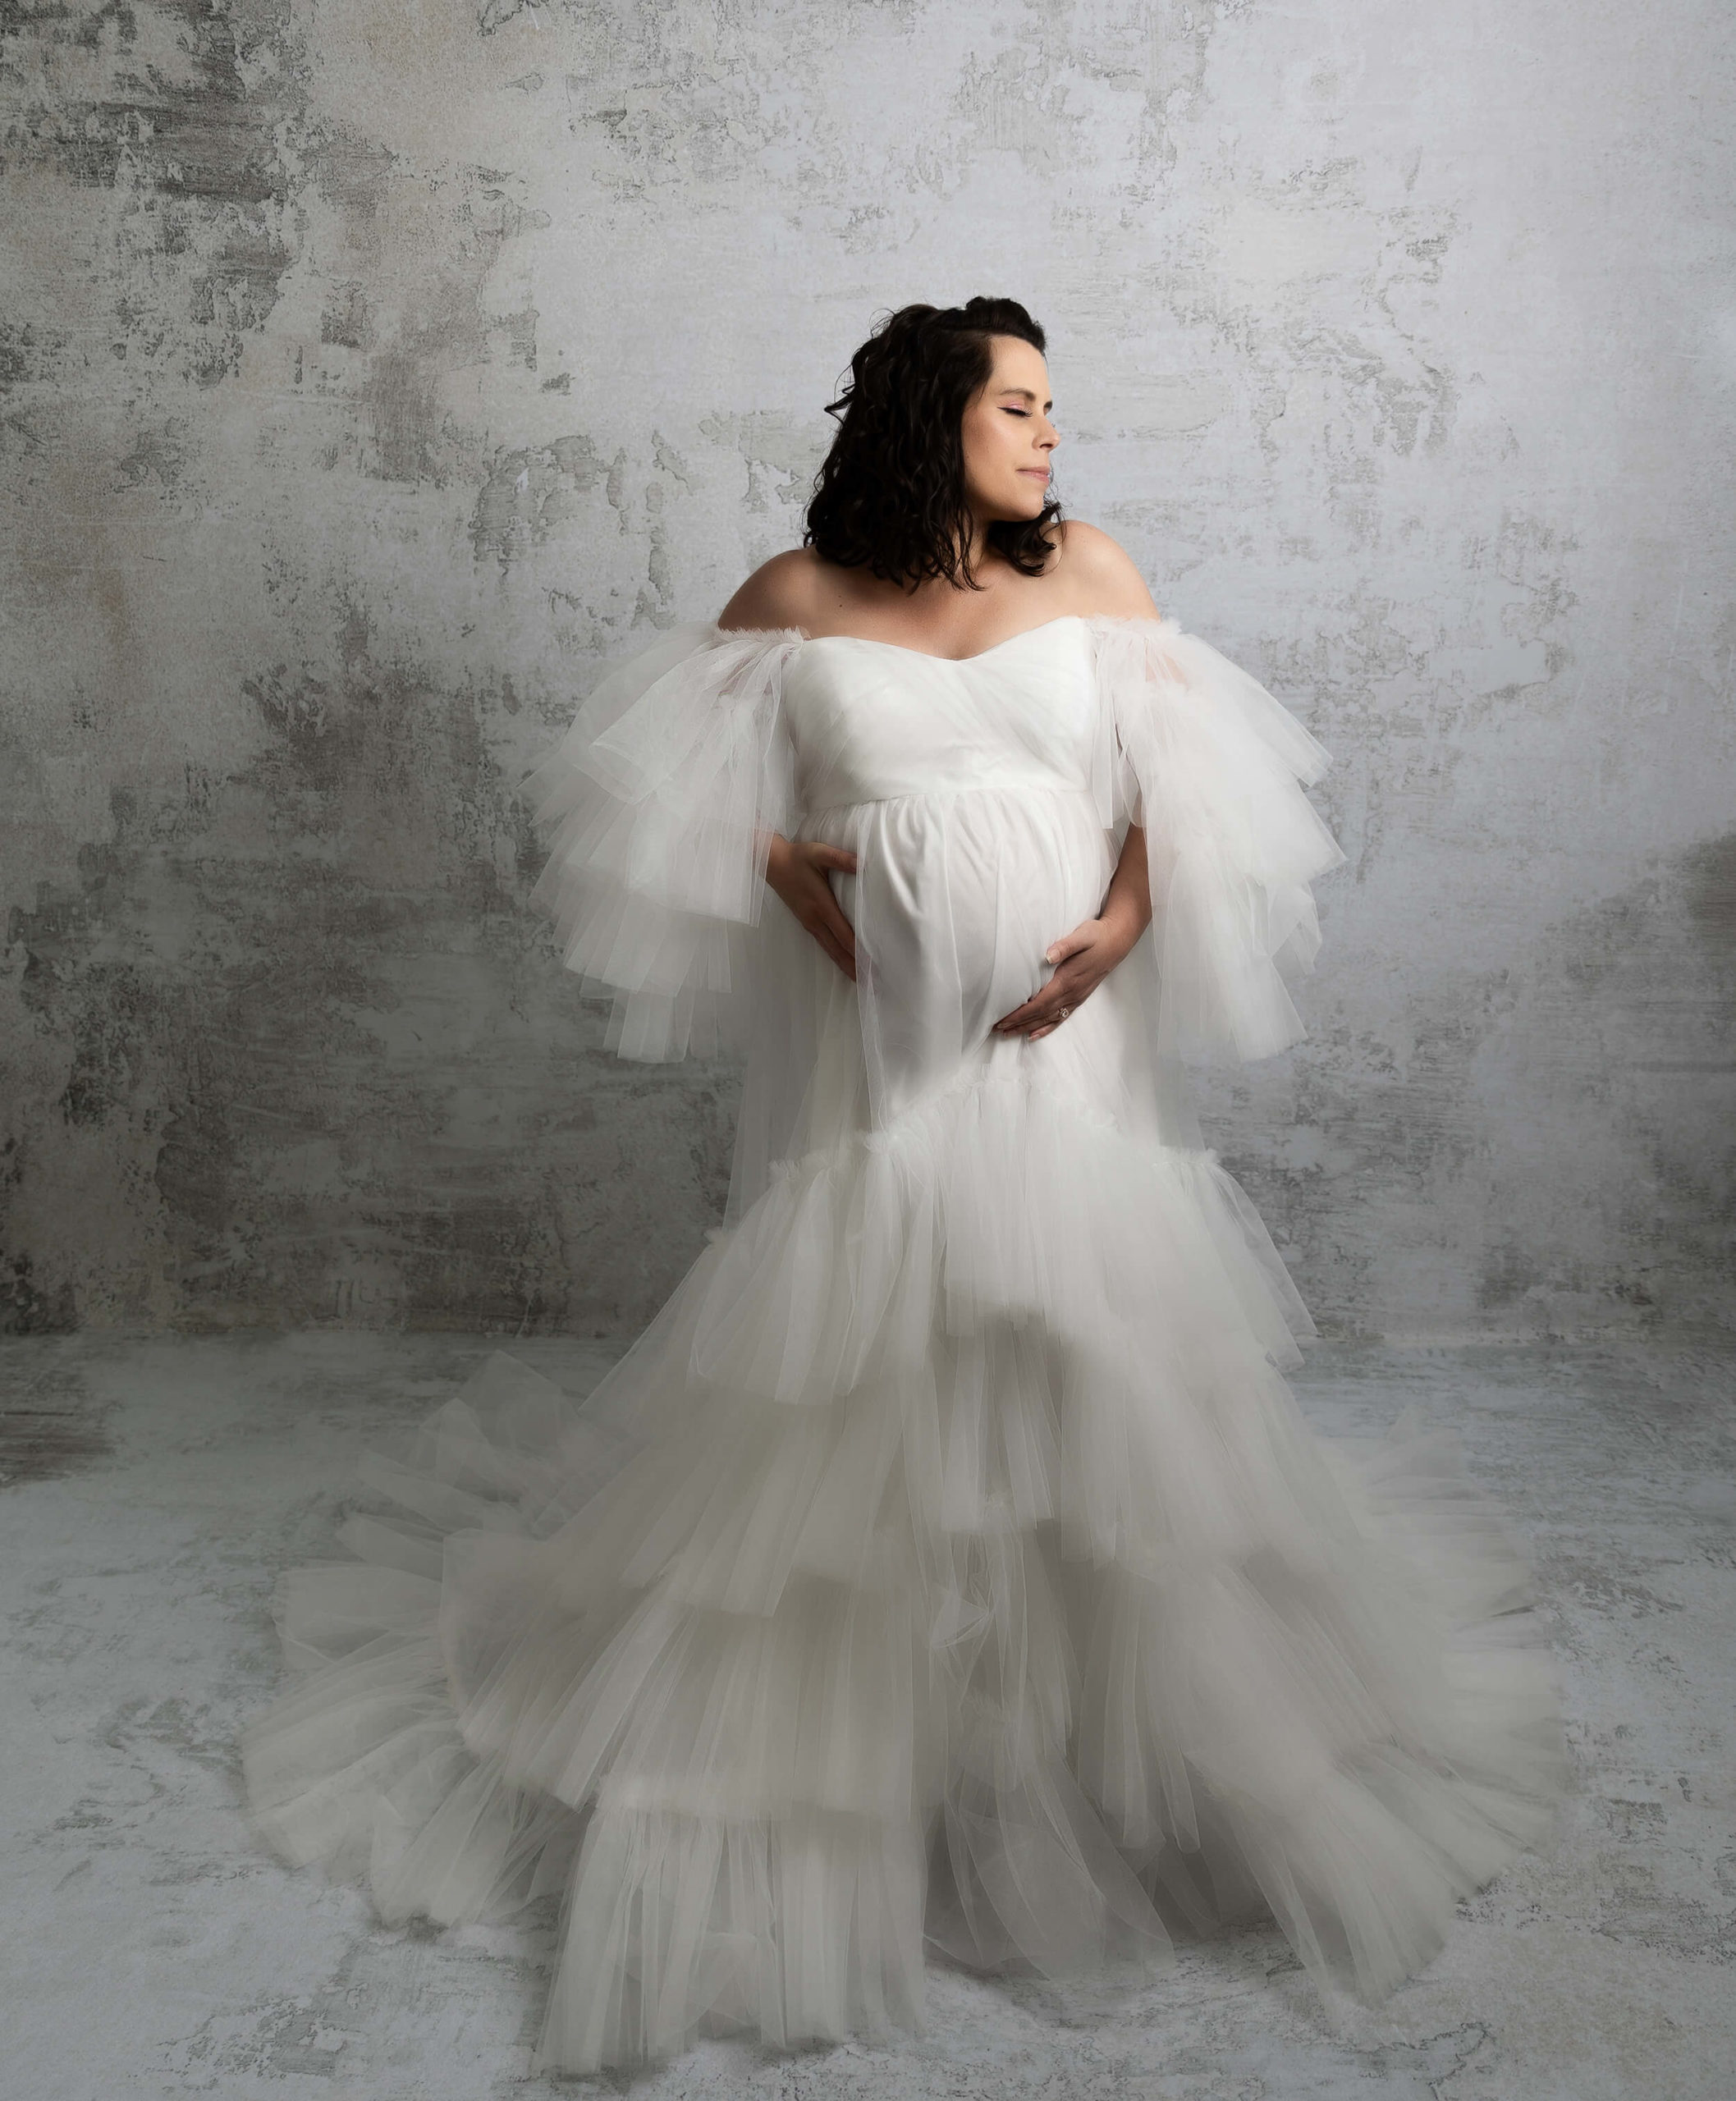 Photo of a pregnant mother in a white fluffy dress